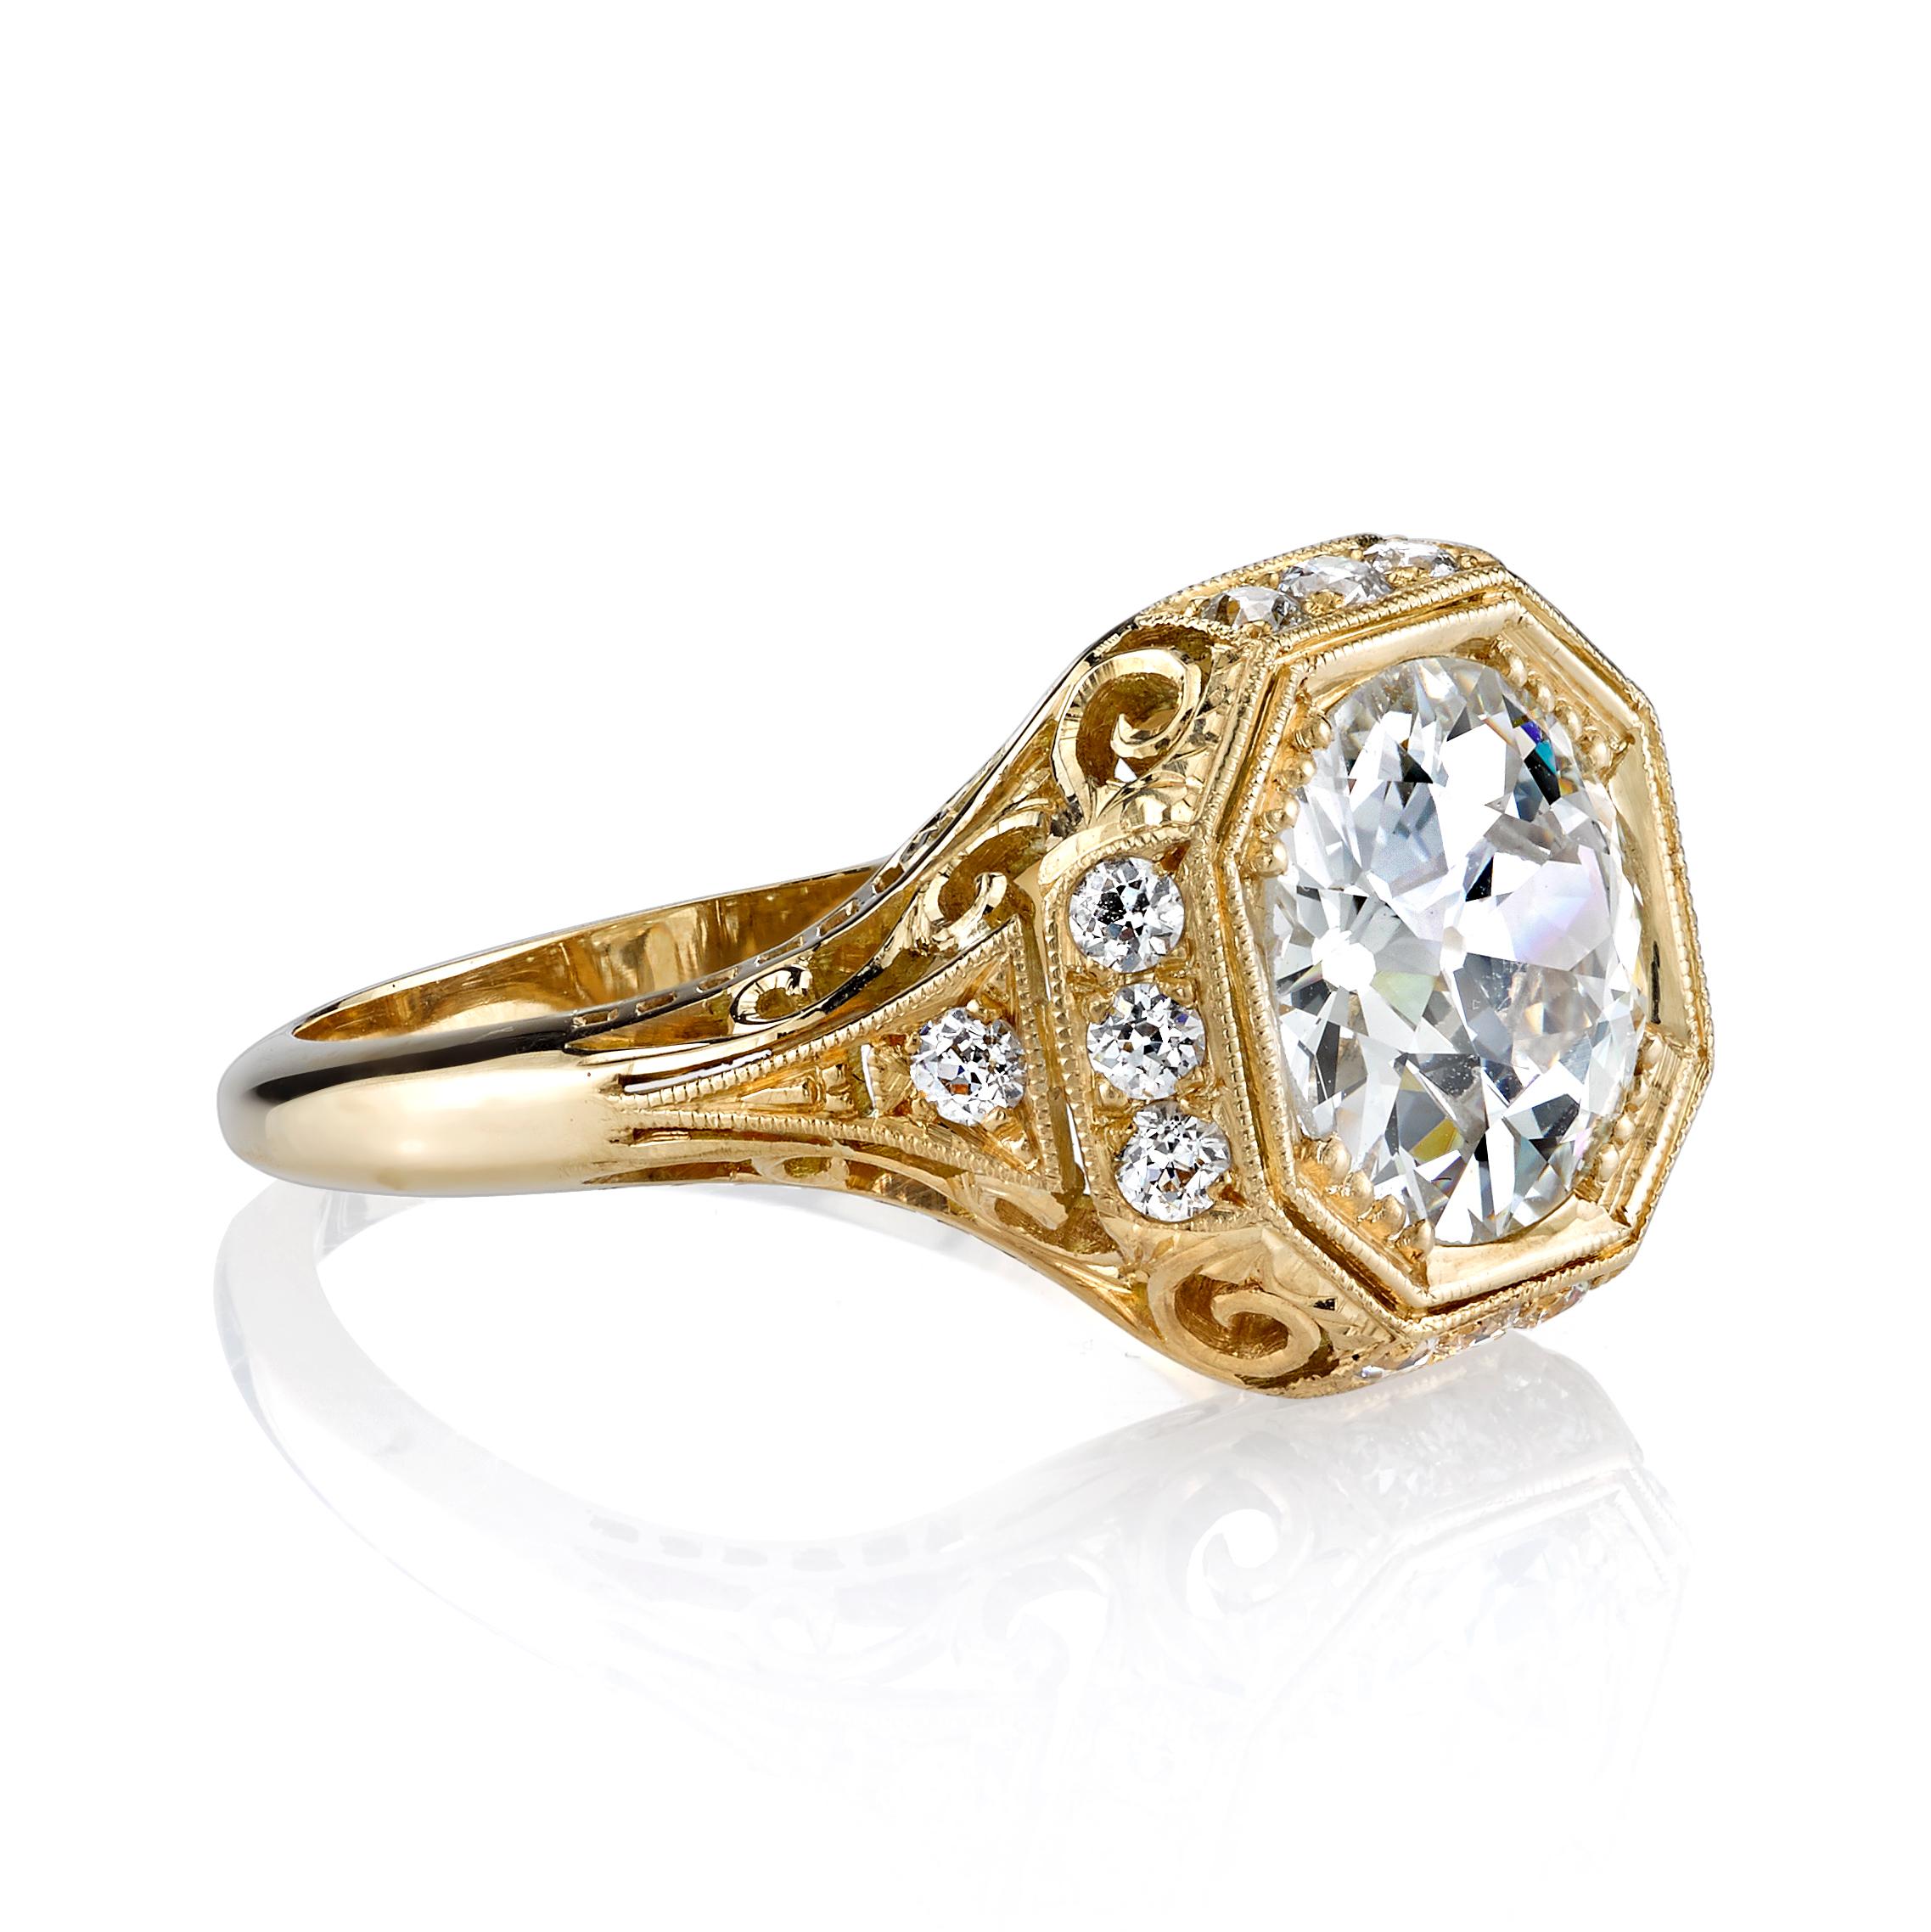 2.70ct I/VS2 GIA certified old European cut diamond set in a handcrafted 18k Yellow Gold mounting with 0.43ctw accent stones. A classic Edwardian inspired design featuring an octagonal frame and filigree.